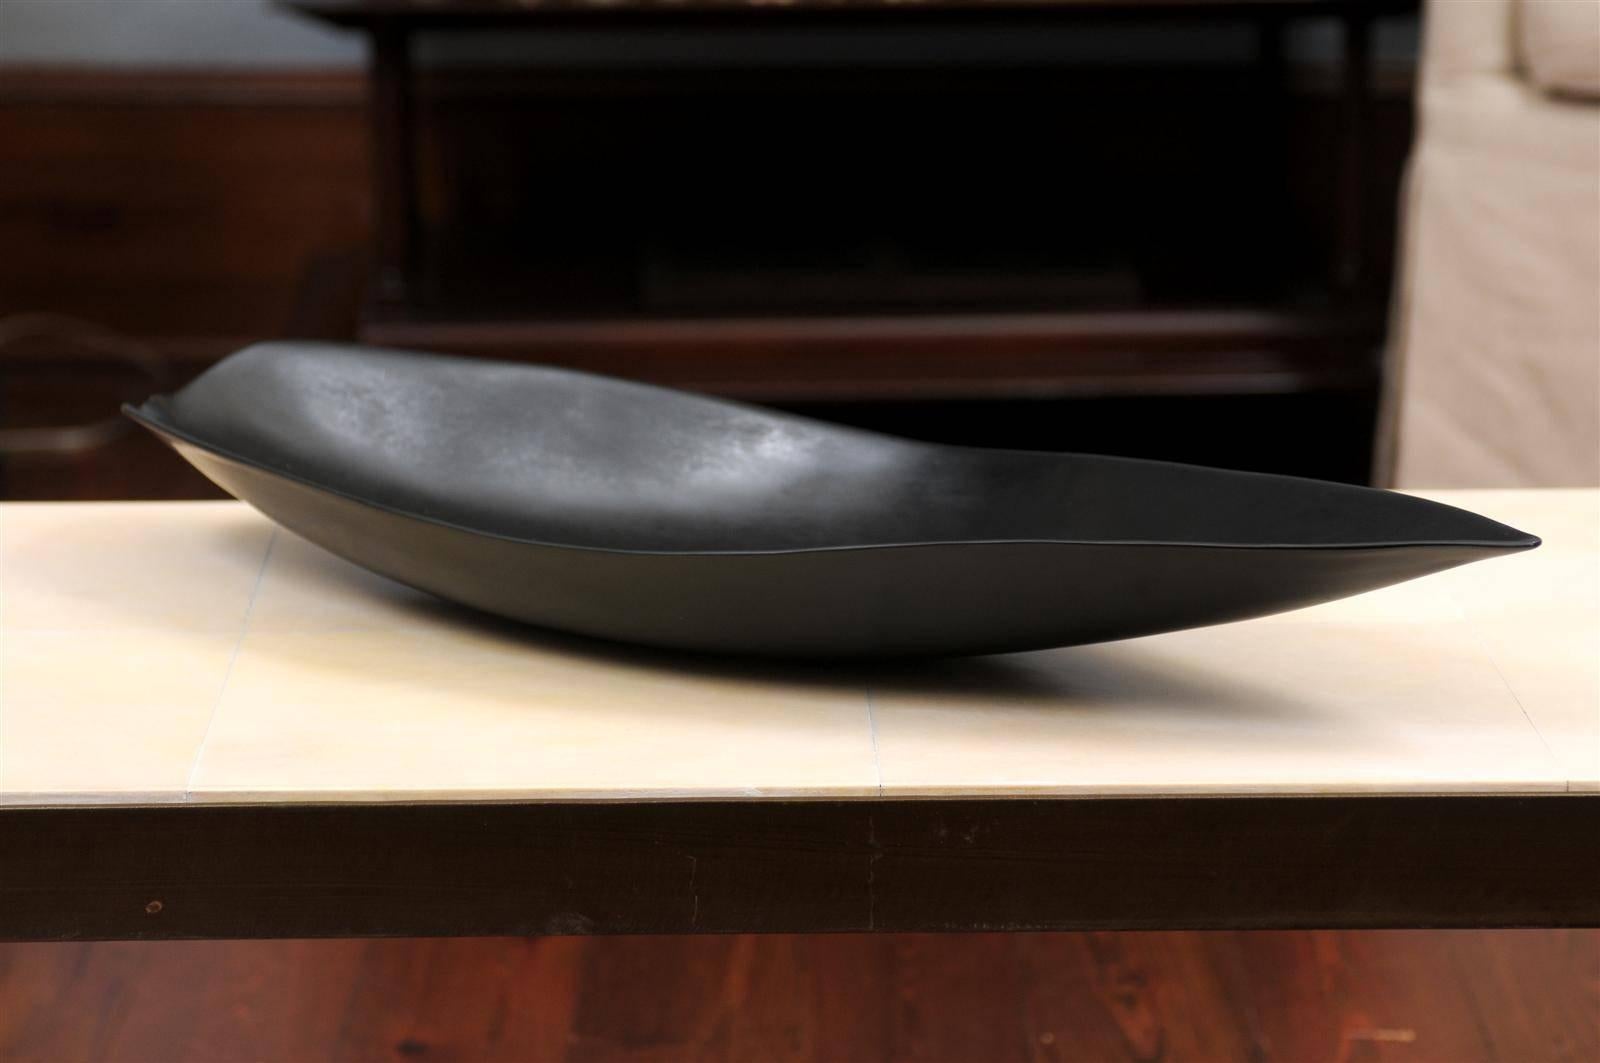 Black leaf lacquered tray Robert Kuo. Damaged slightly and has a chip in the corner/side.